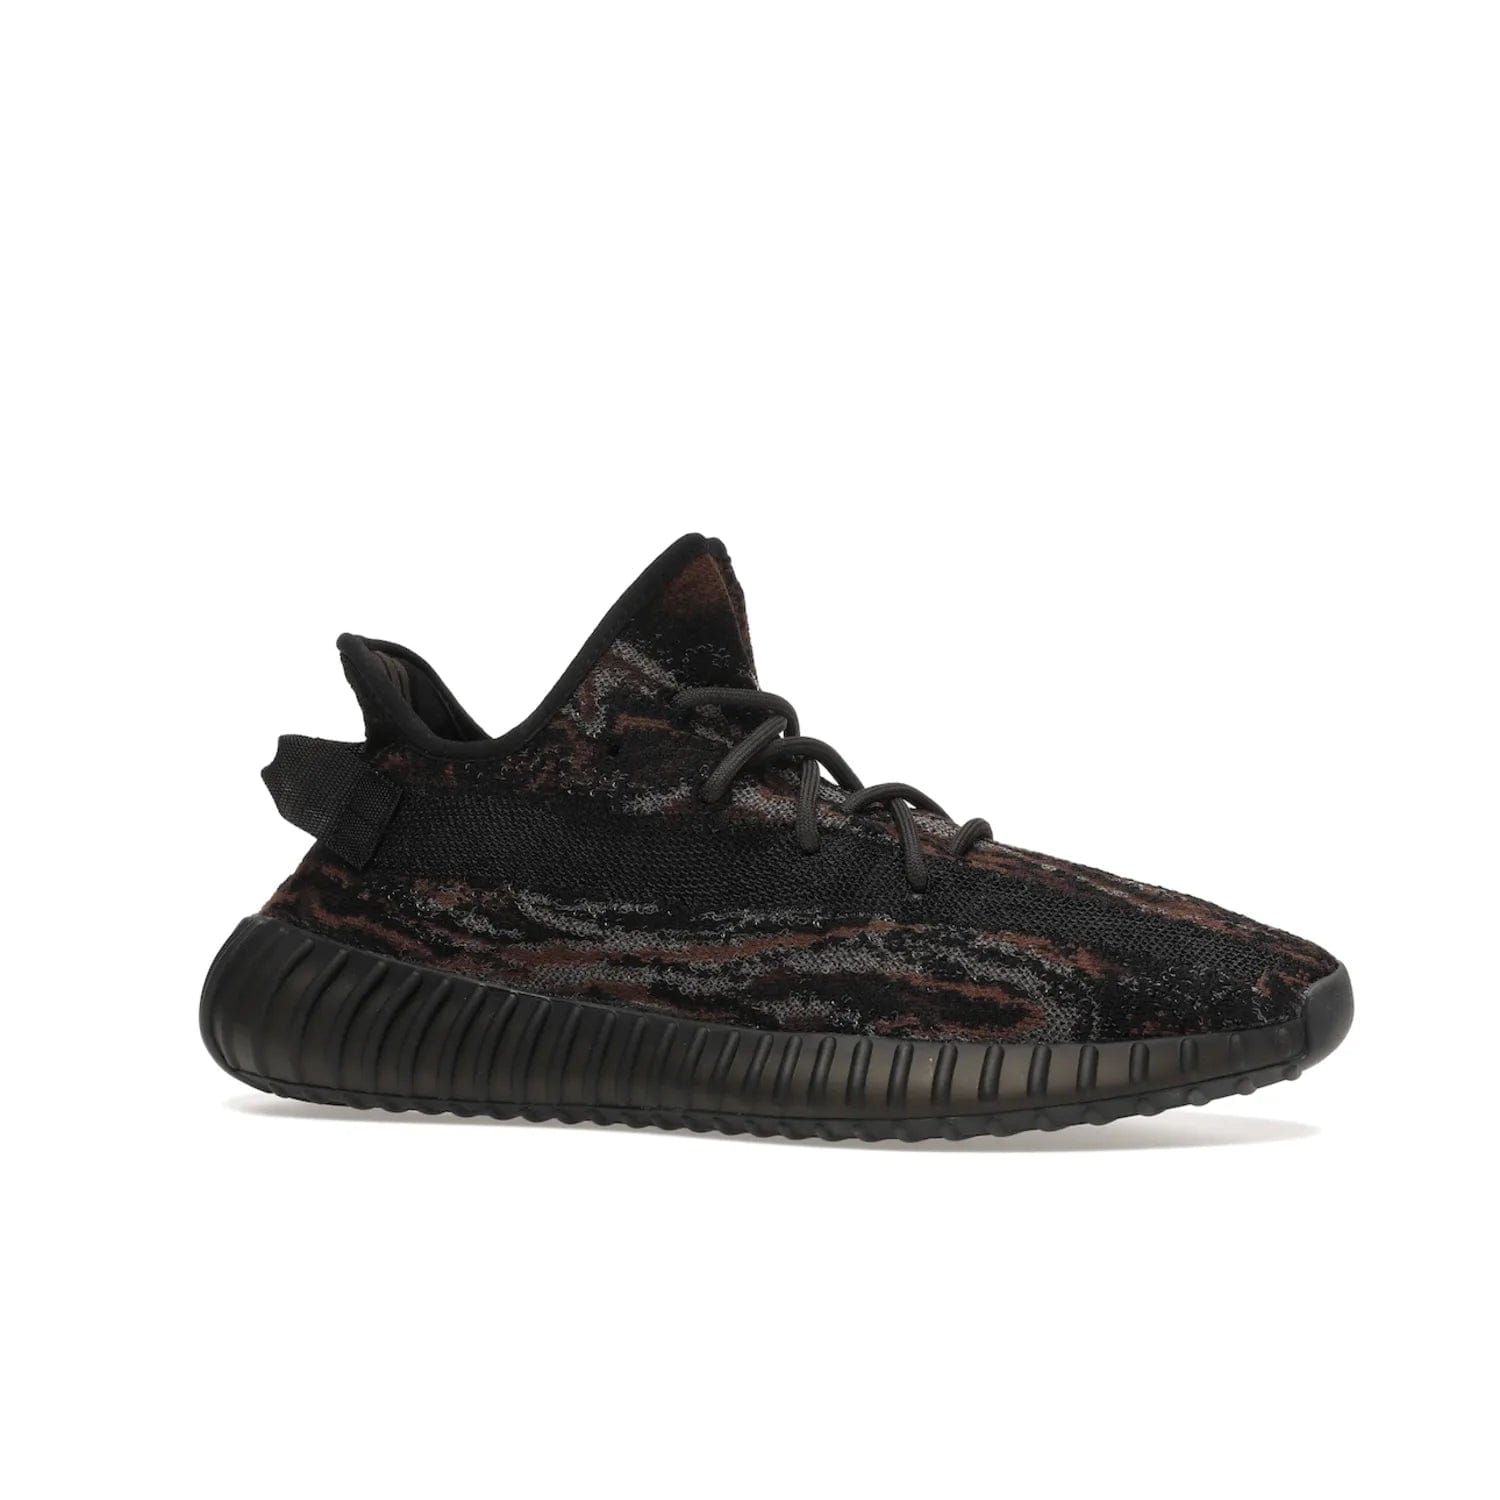 adidas Yeezy Boost 350 V2 MX Rock - Image 3 - Only at www.BallersClubKickz.com - The adidas Yeezy Boost 350 V2 MX Rock features a stylish marbled upper of black, grey, and brown tones. Shop the signature Boost sole, heel tab, and mesh side stripe now, available December of 2021.